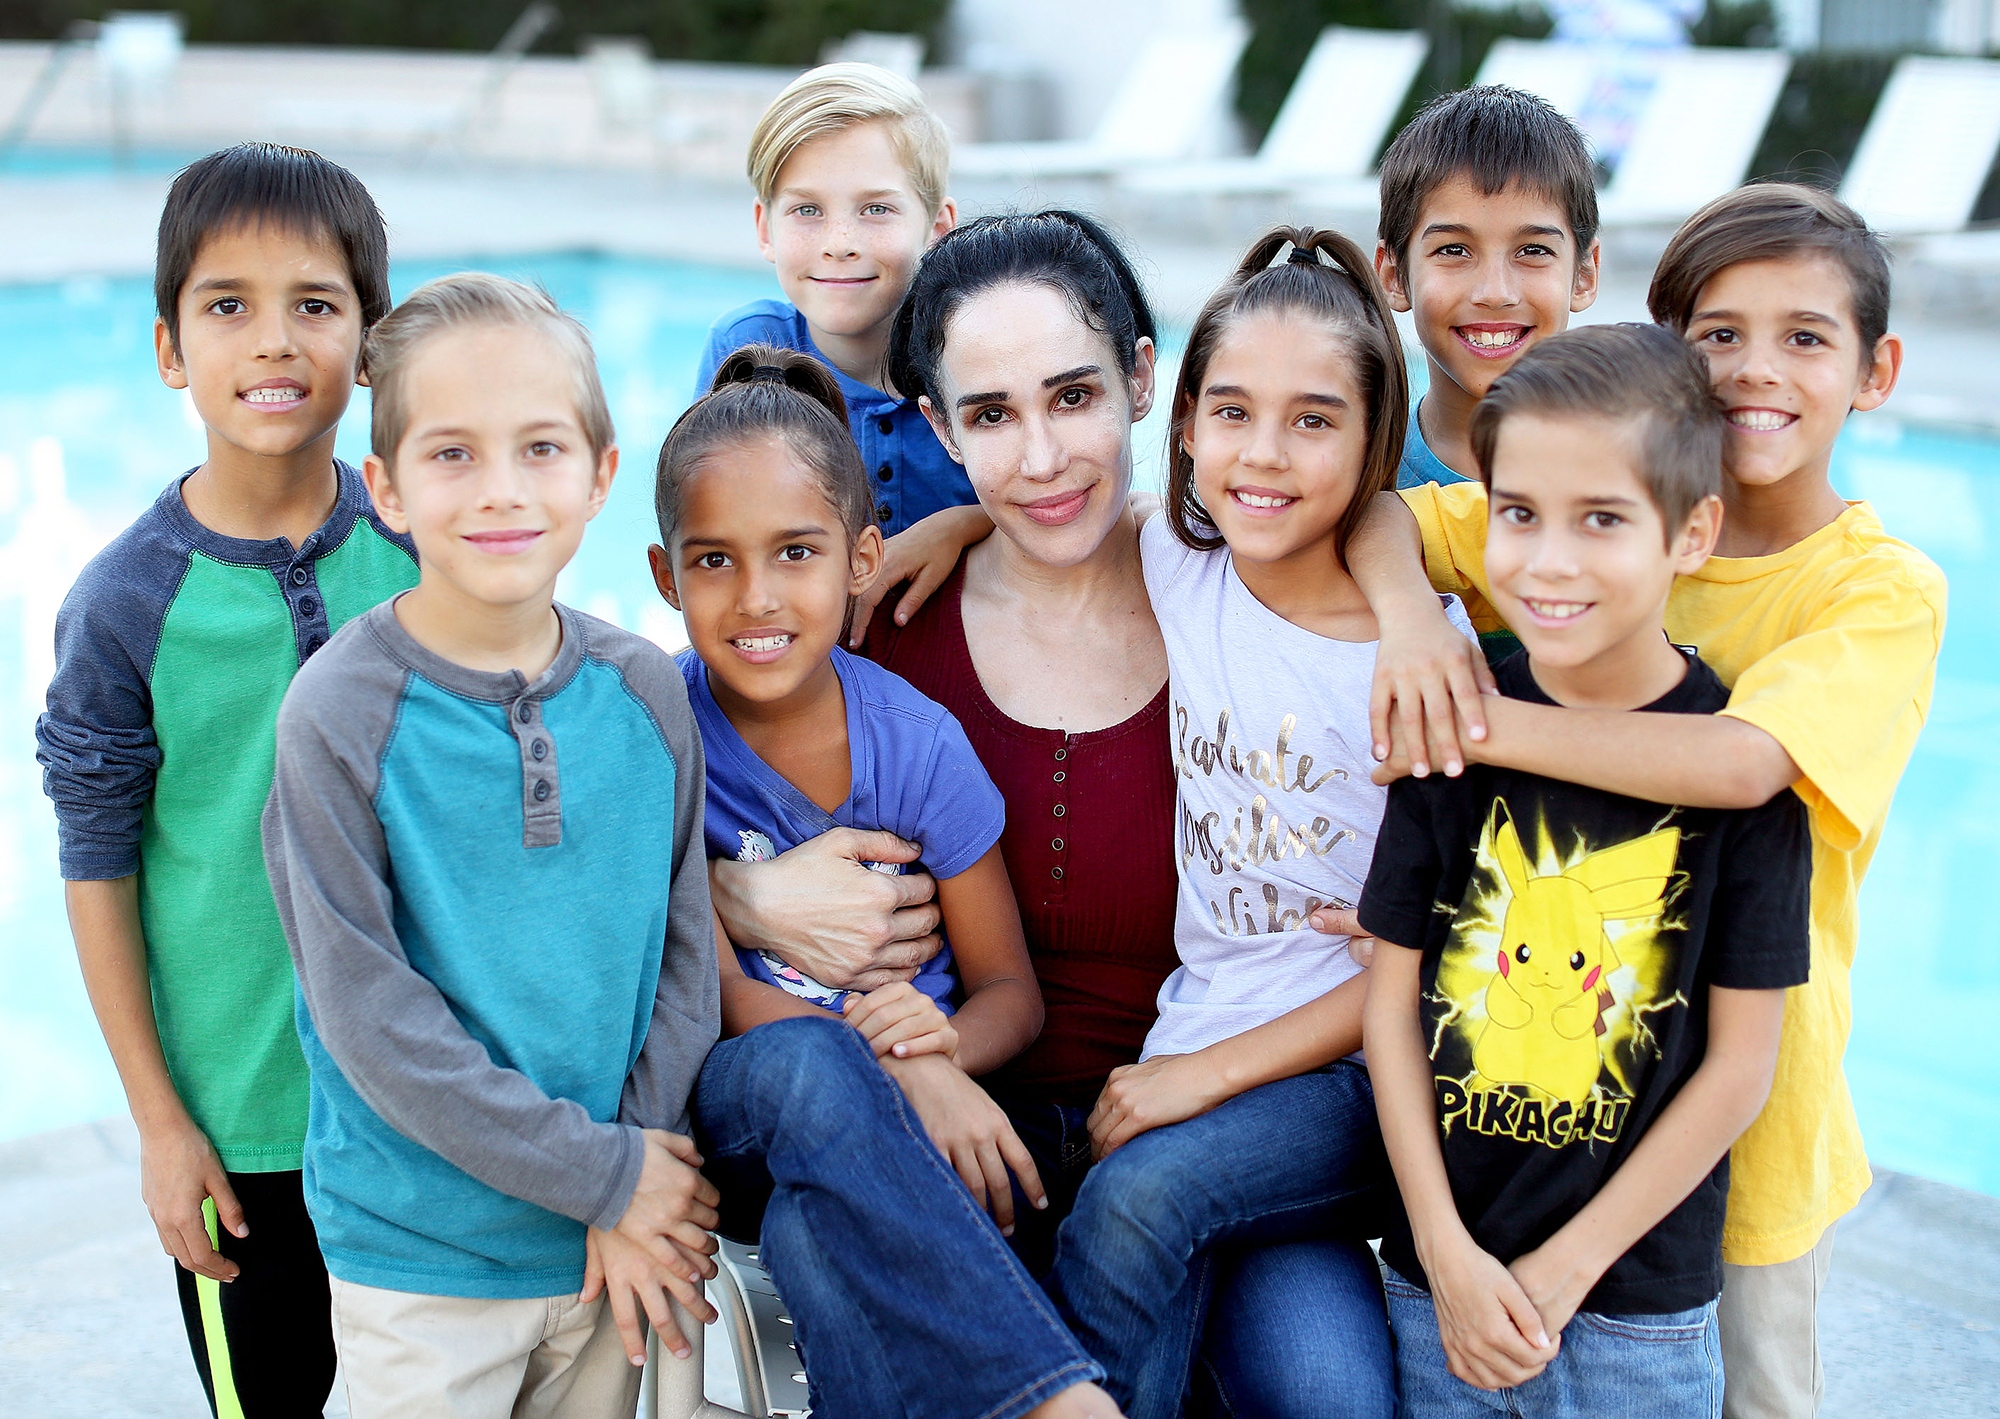 Octomom Nadya Suleman Was Born Into Struggle and Wanted a PhD